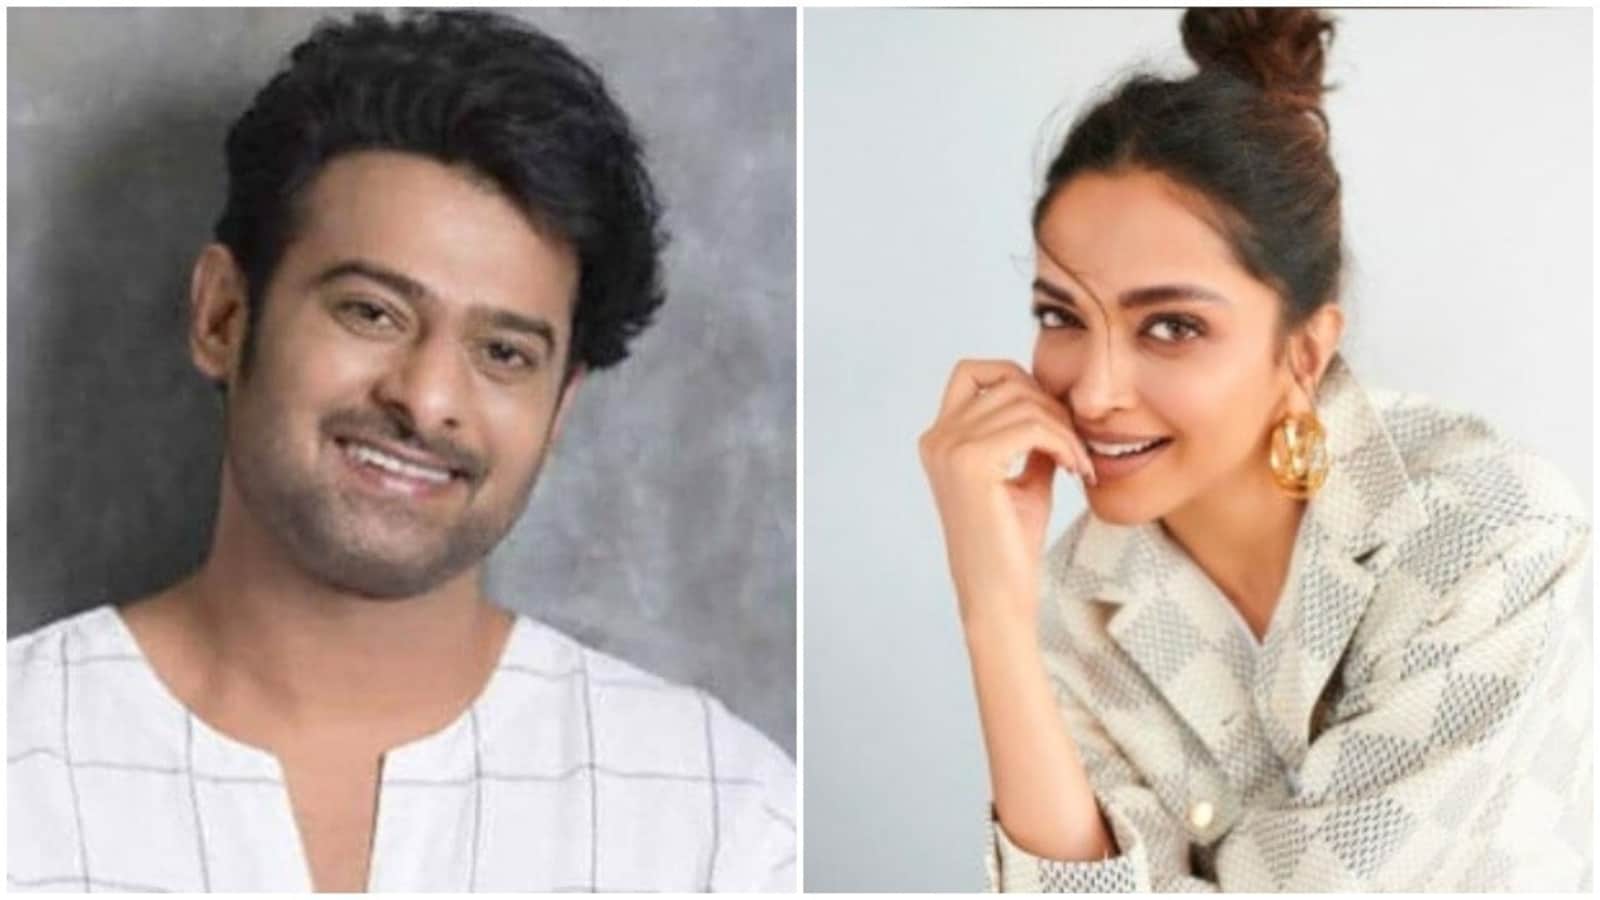 Prabhas recalls his first conversation with Deepika: 'She asked me ...